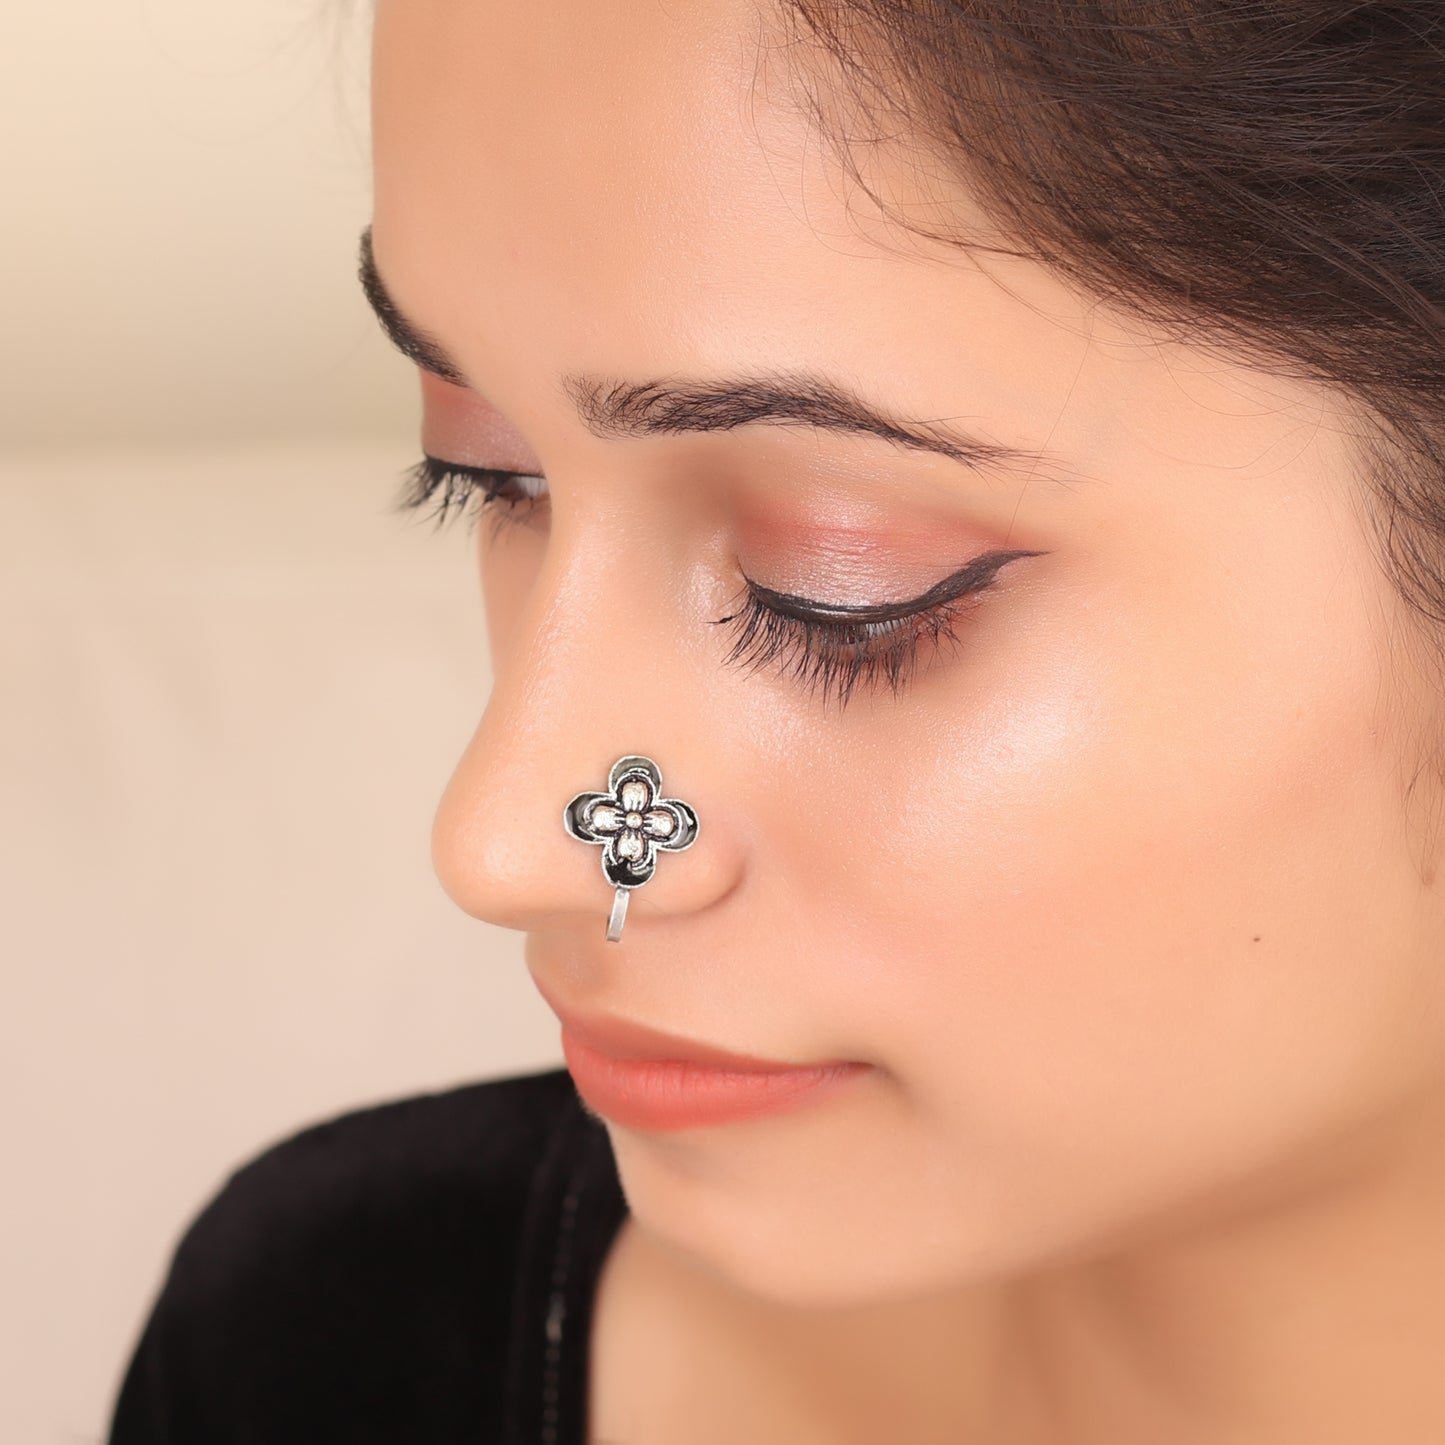 The Butterfly Nose Pin in Black